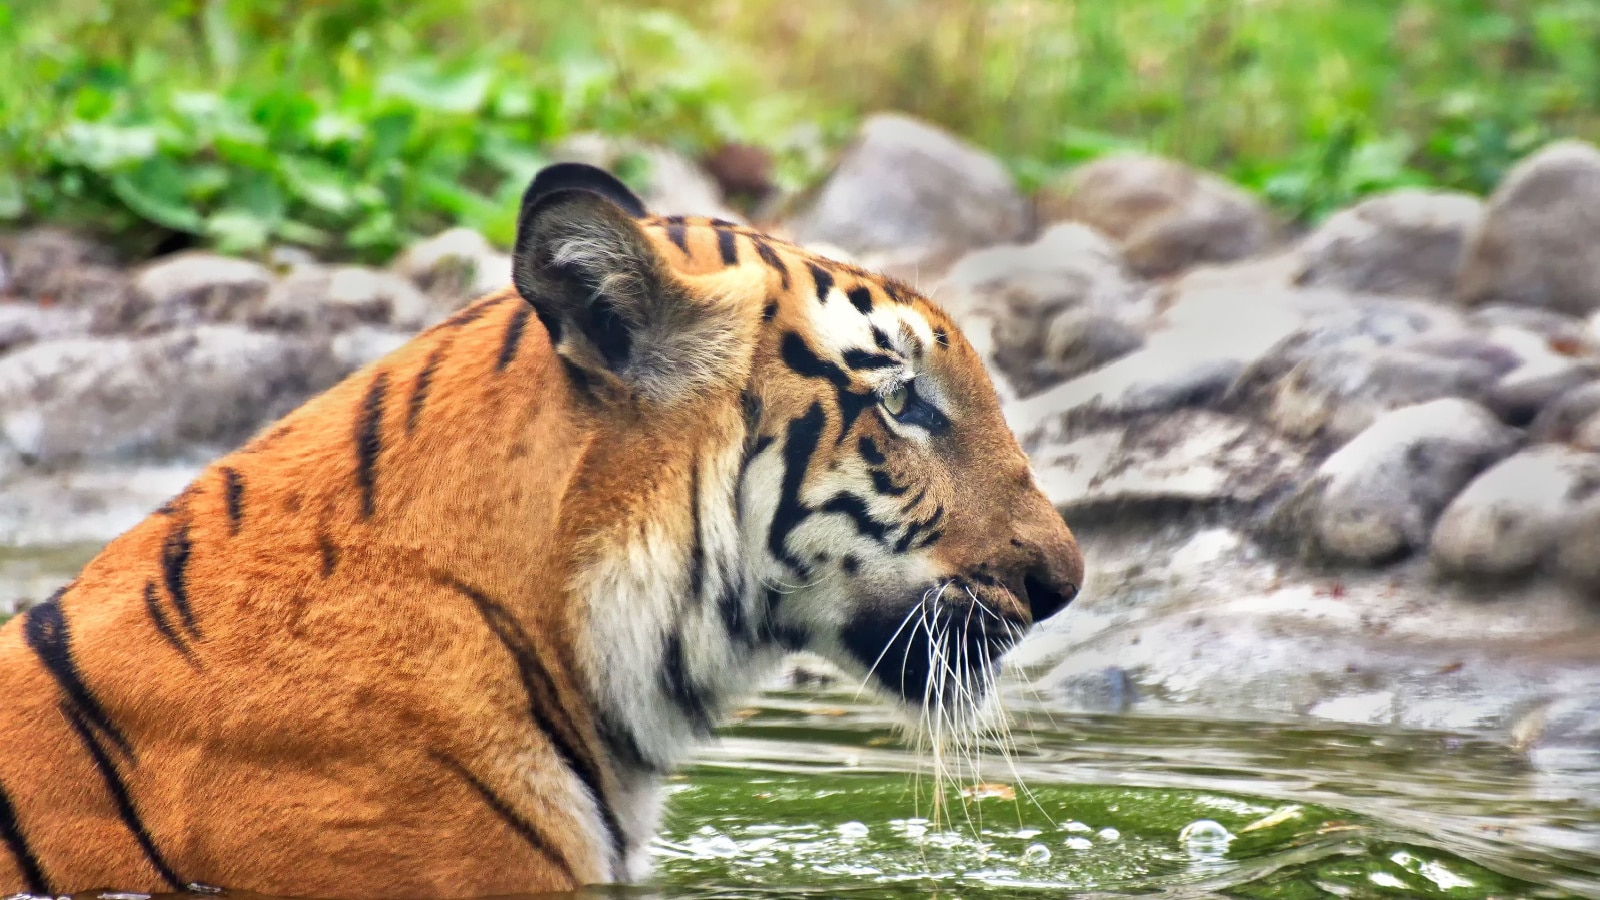 Beautiful Royal Bengal Tiger , Panthera Tigris, bathing in water. It is largest cat species and endangered , only found in Sundarban mangrove forest of India and Bangladesh.